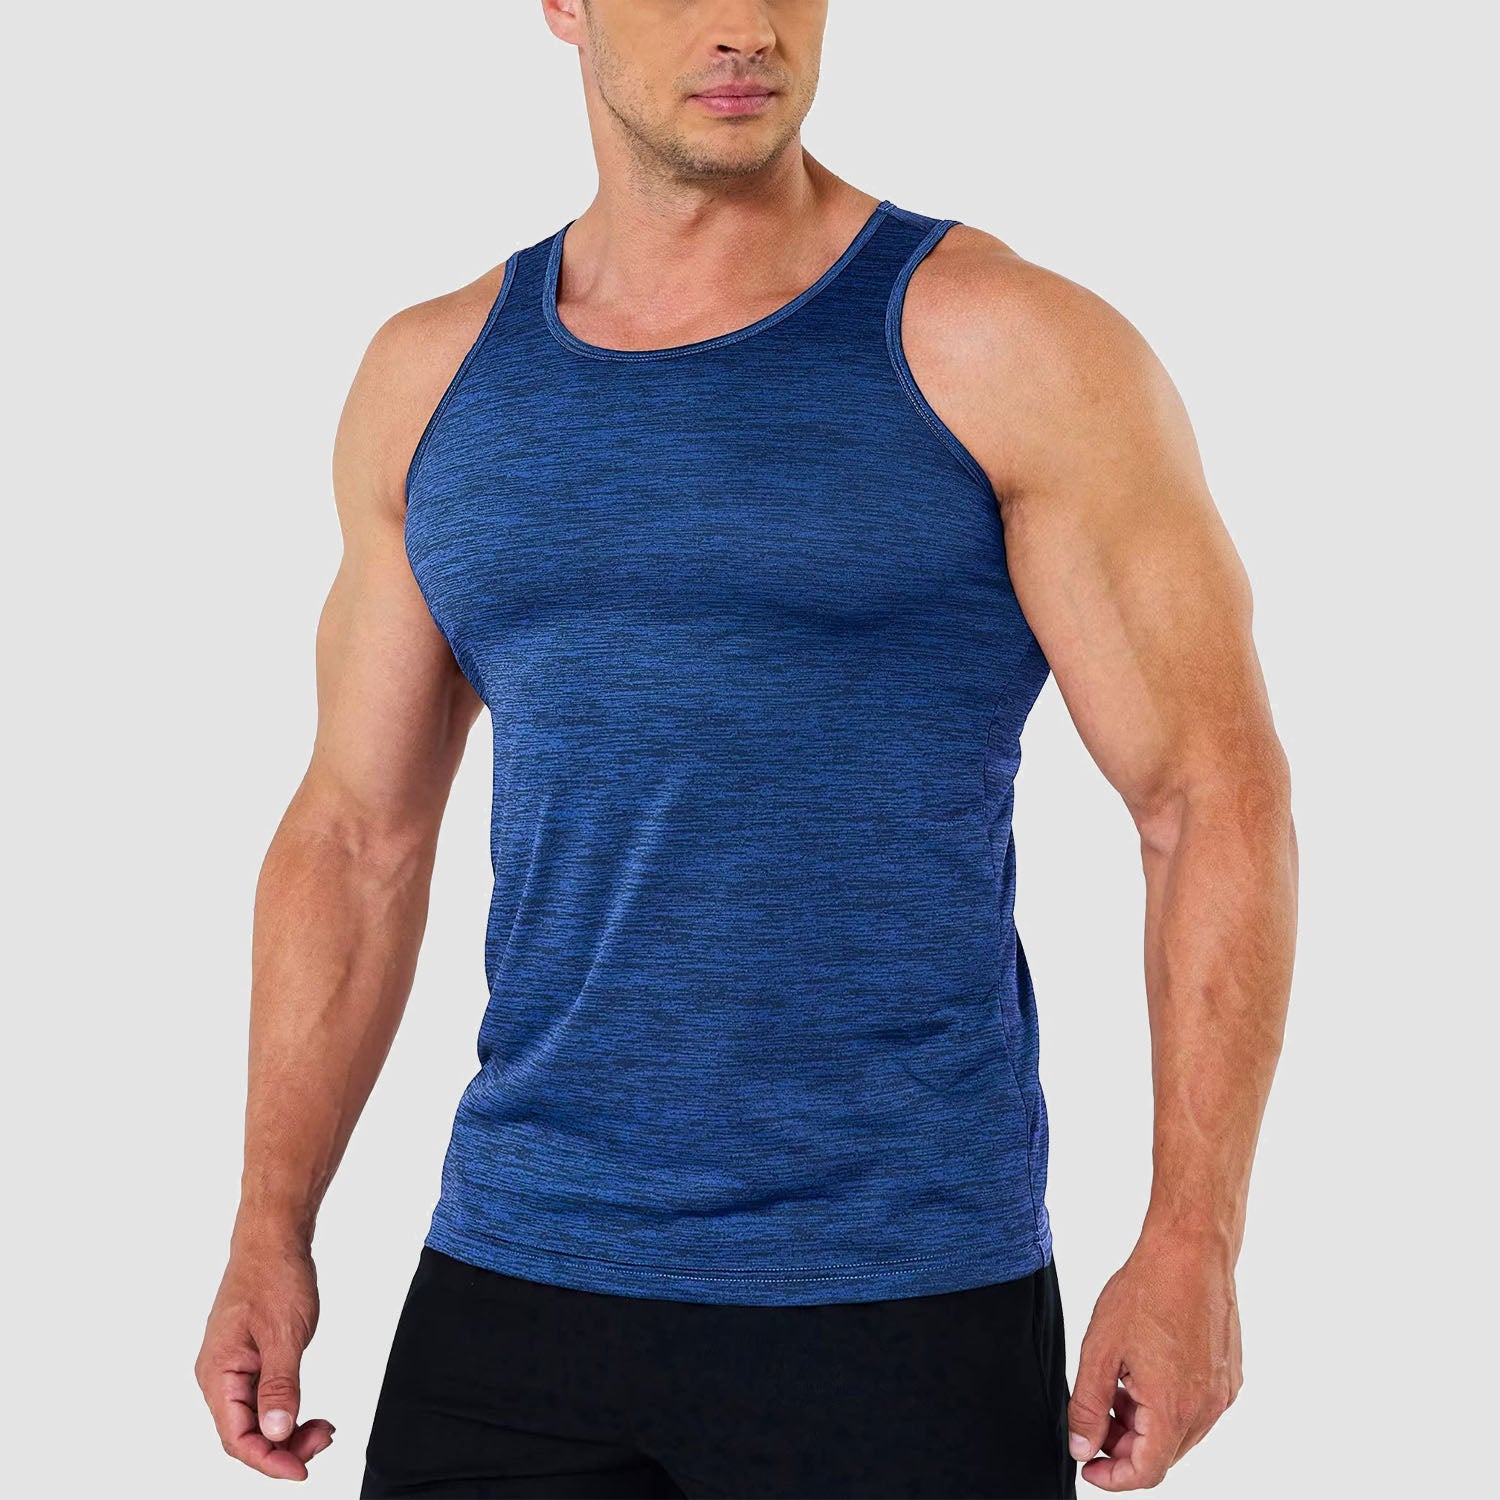 Men's Tank Tops Quick Dry Workout Sleeveless Gym Muscle Shirts